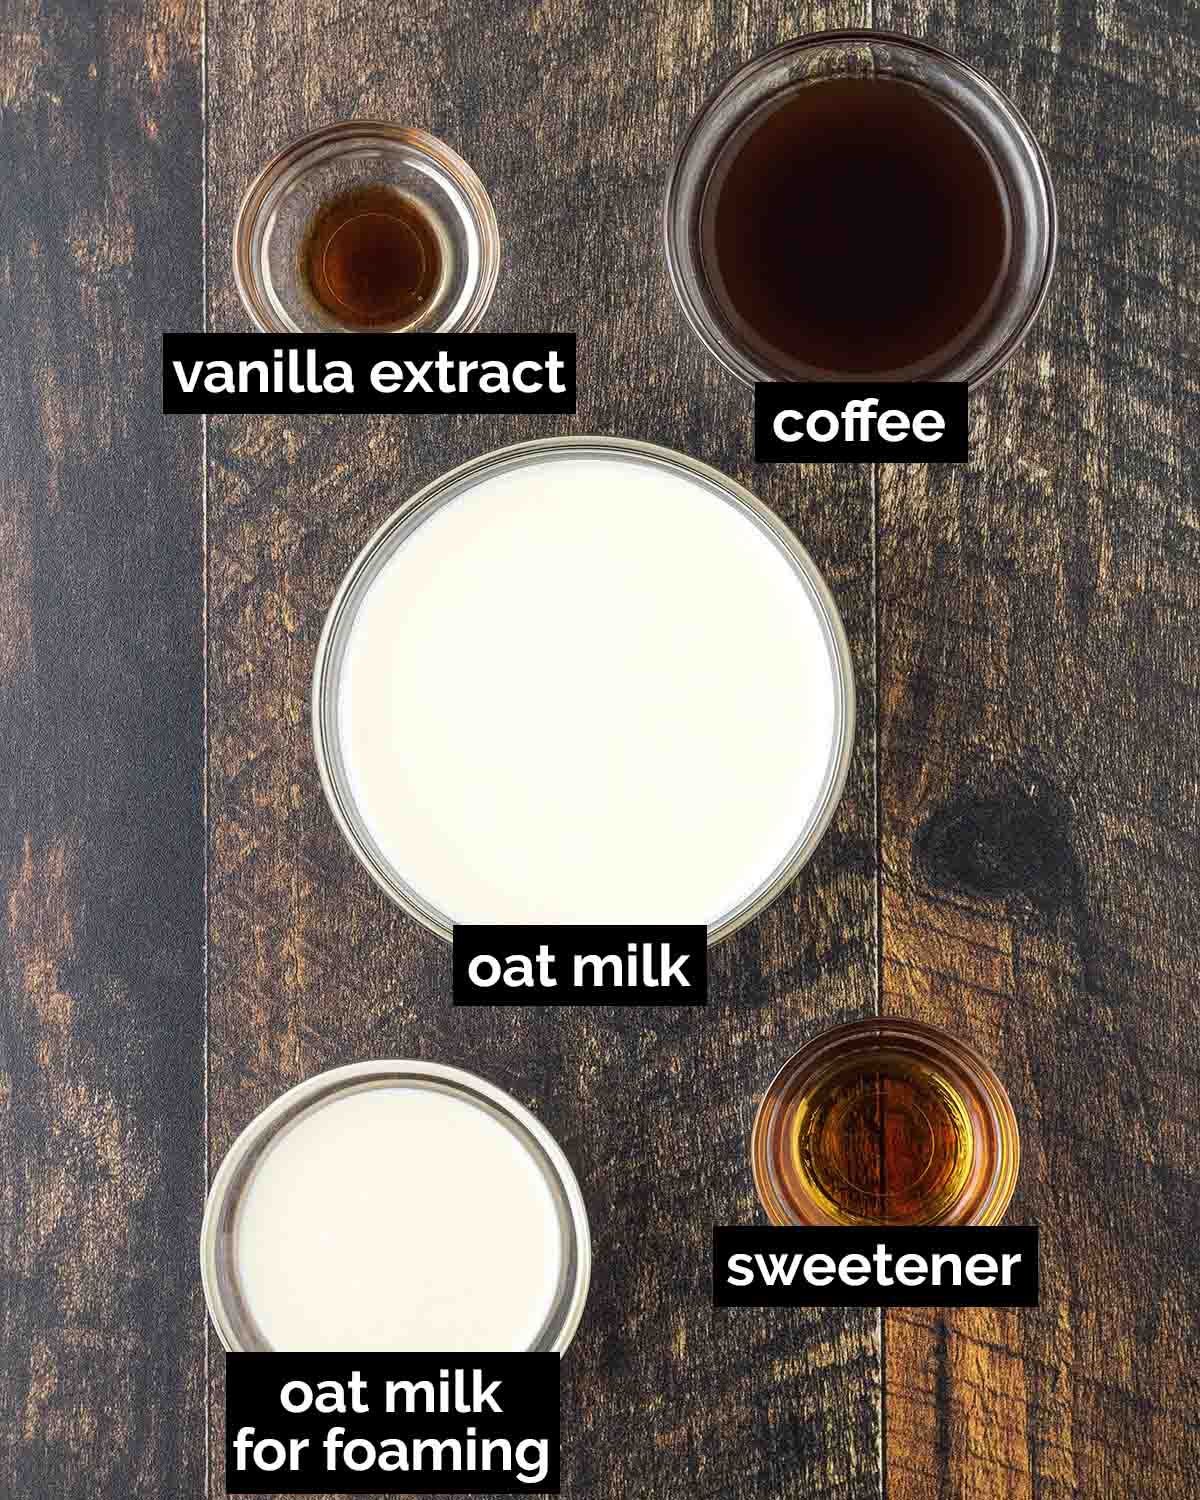 An overhead shot showing the ingredients needed to make an oat milk latte.